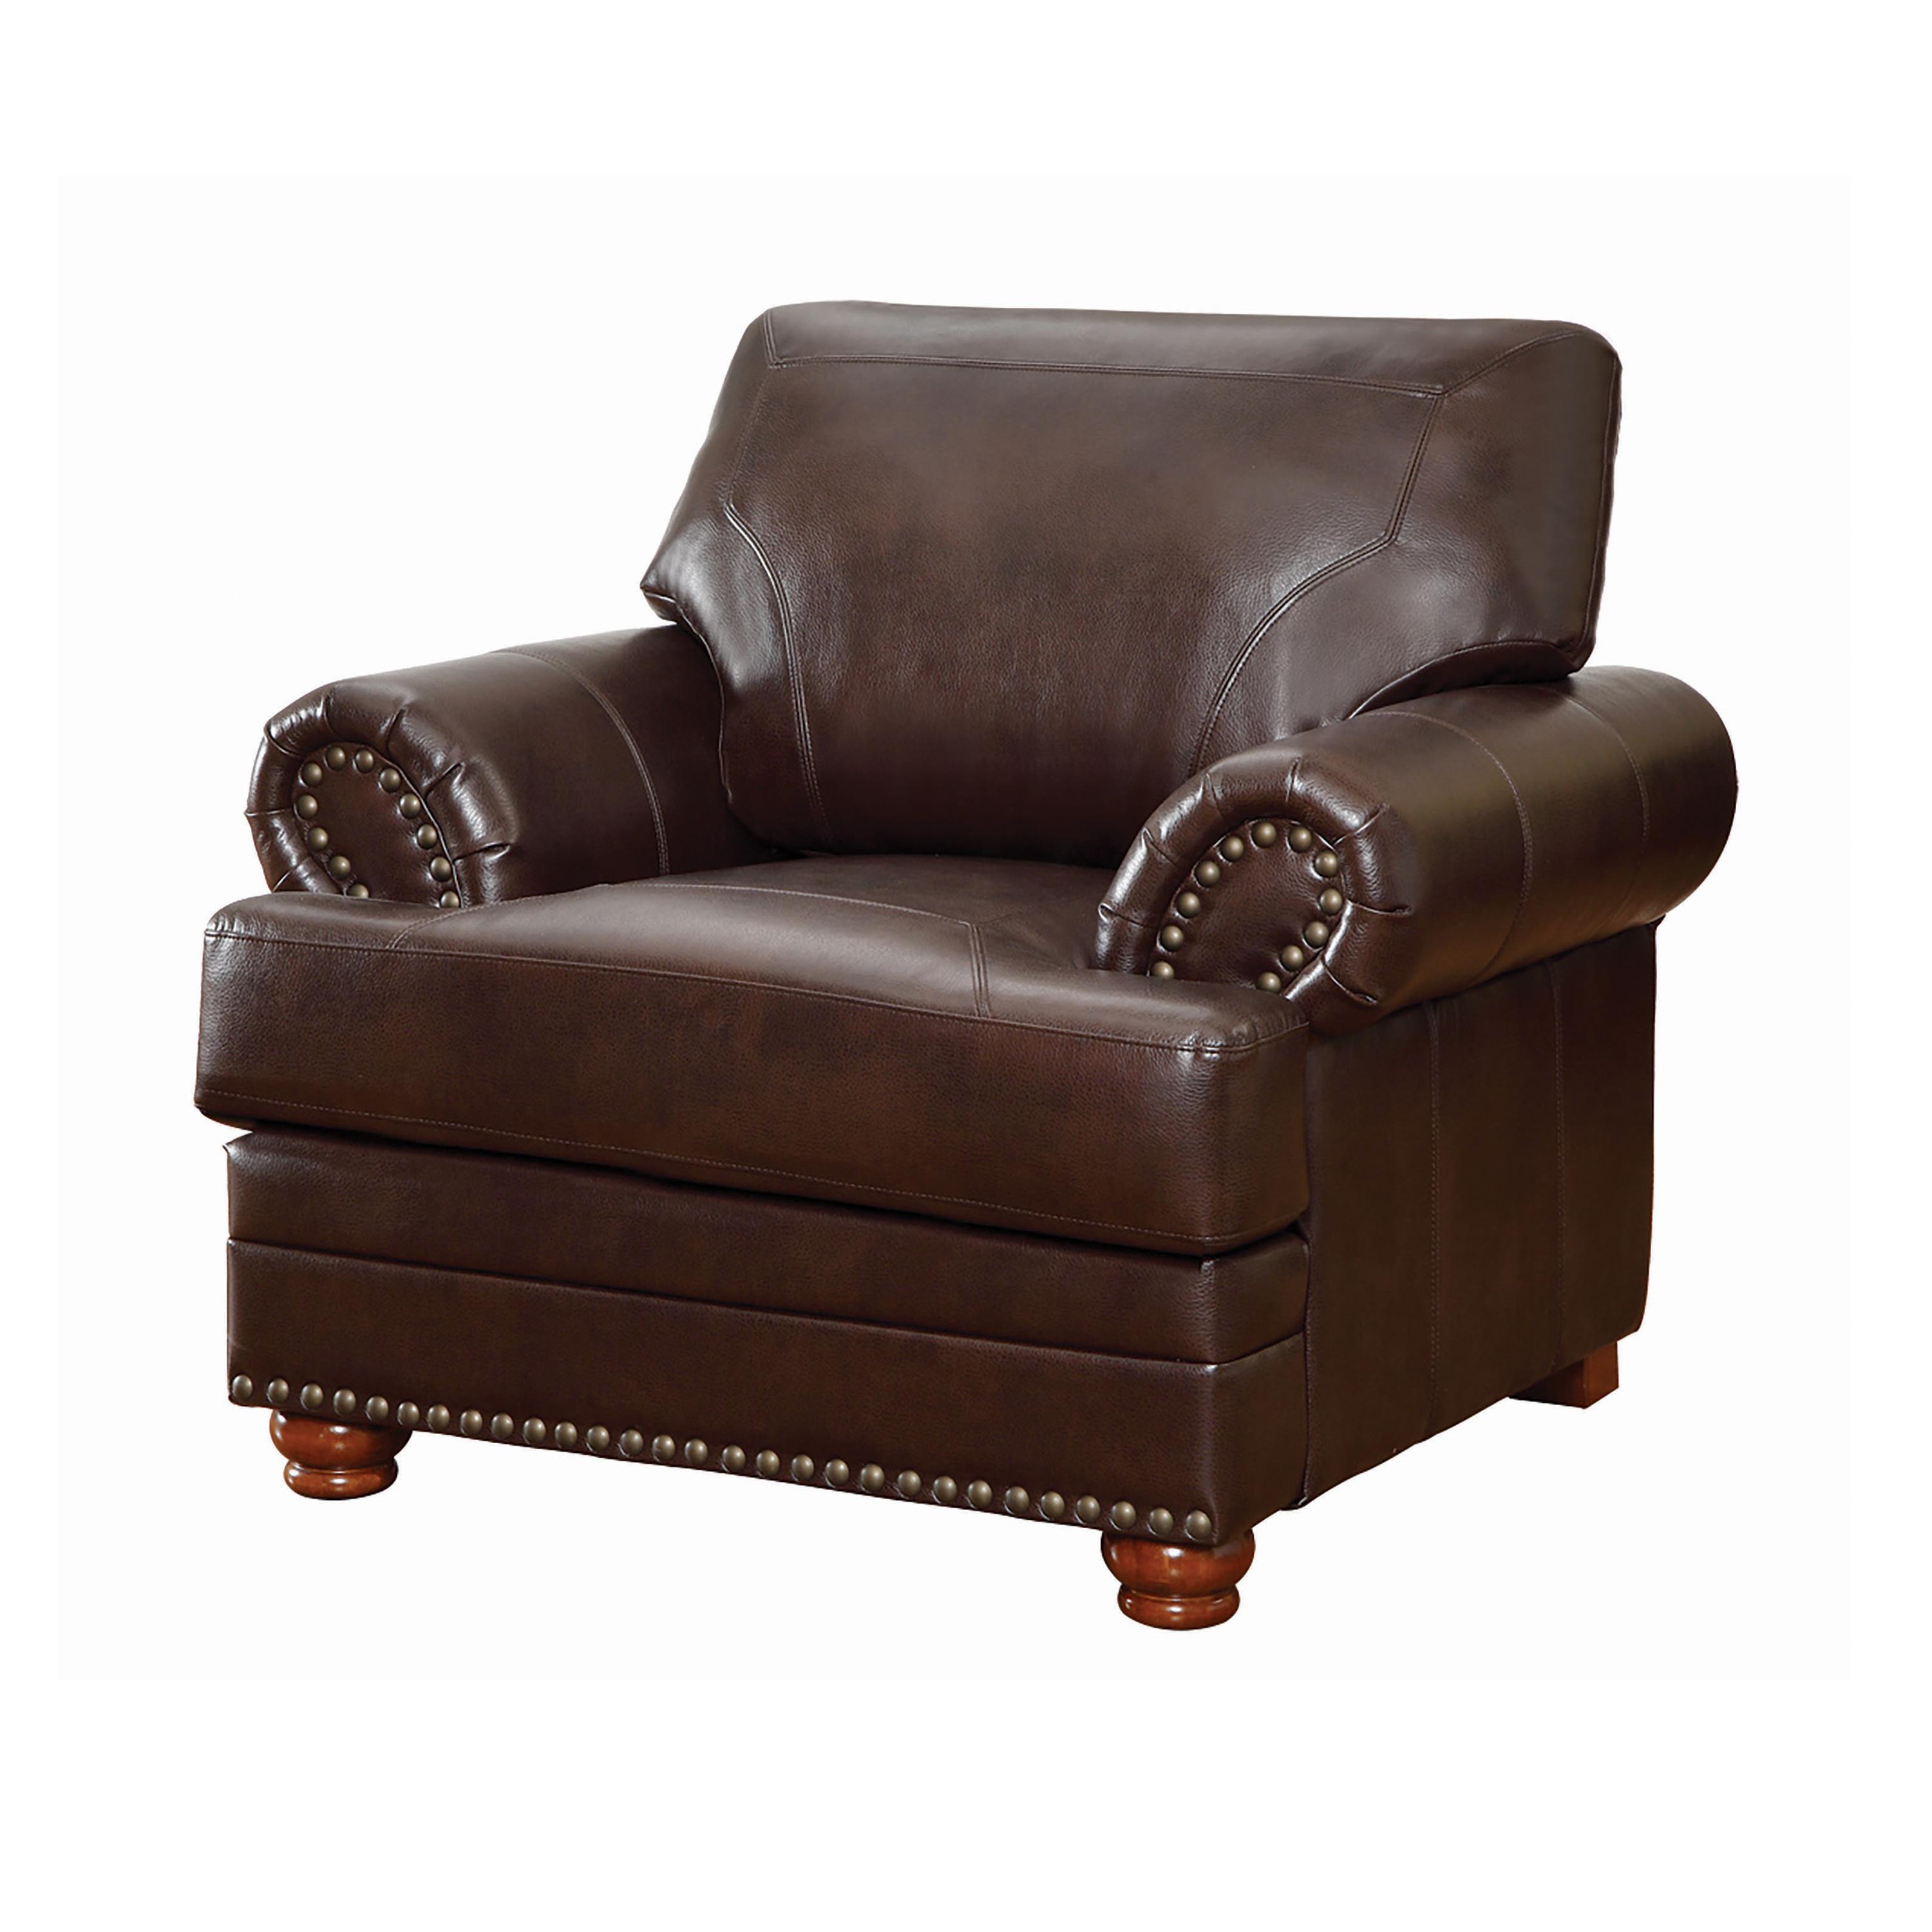 Traditional Arm Chair 504413 Colton 504413 in Brown Leatherette